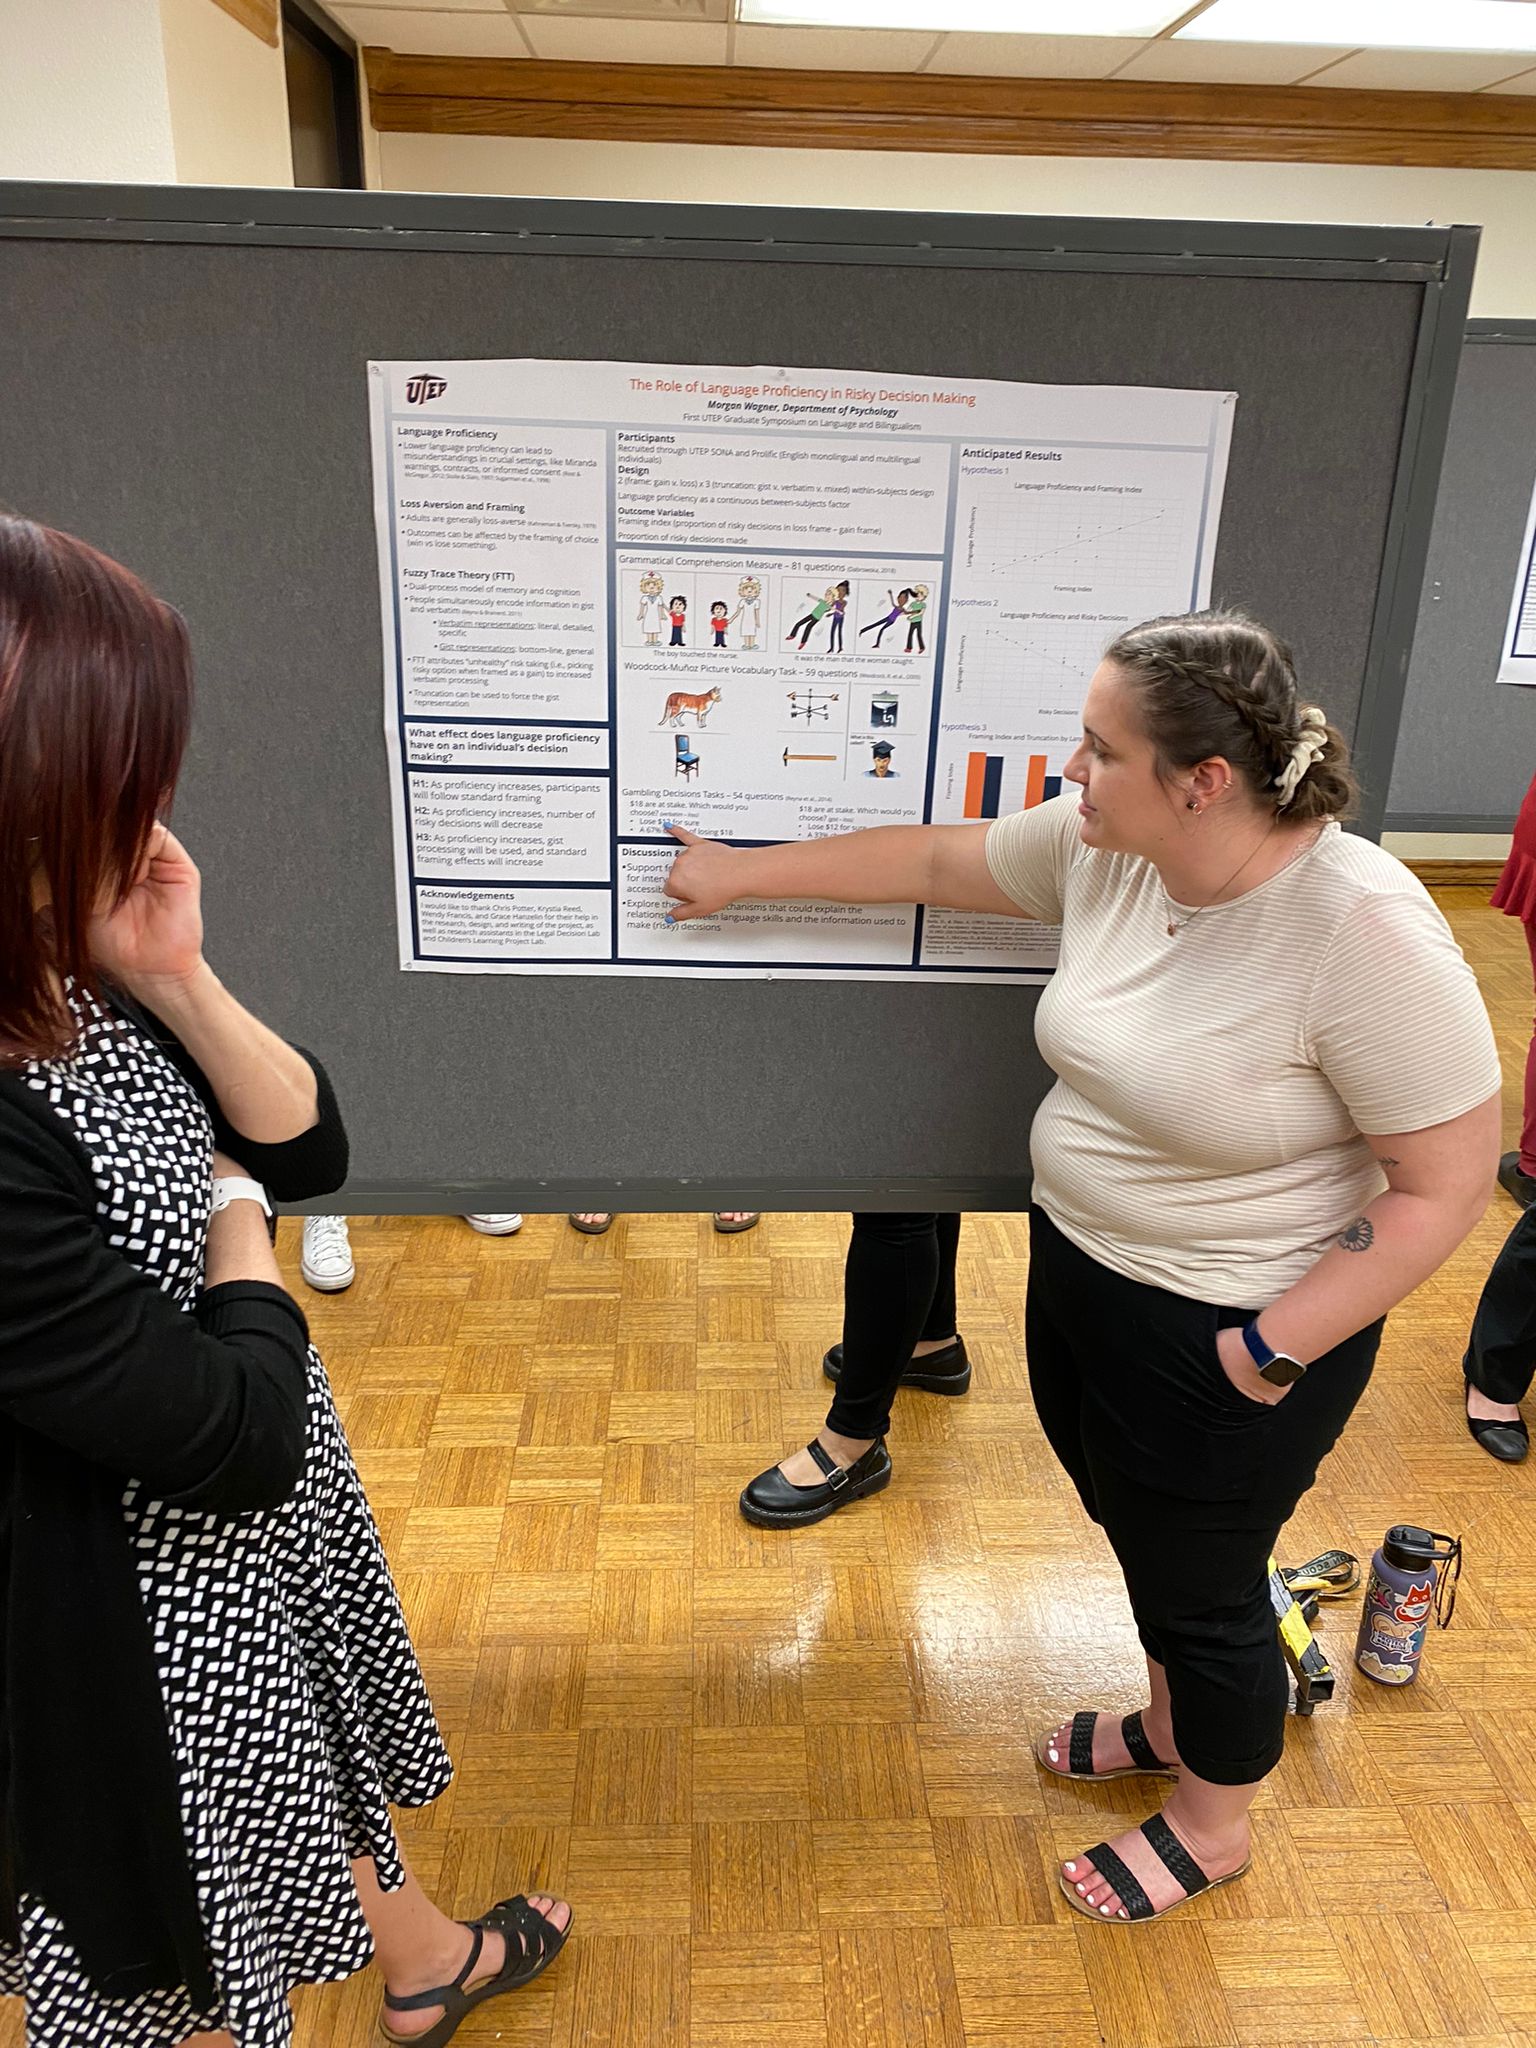 UTEP Hosts First Annual Symposium on Language and Bilingualism